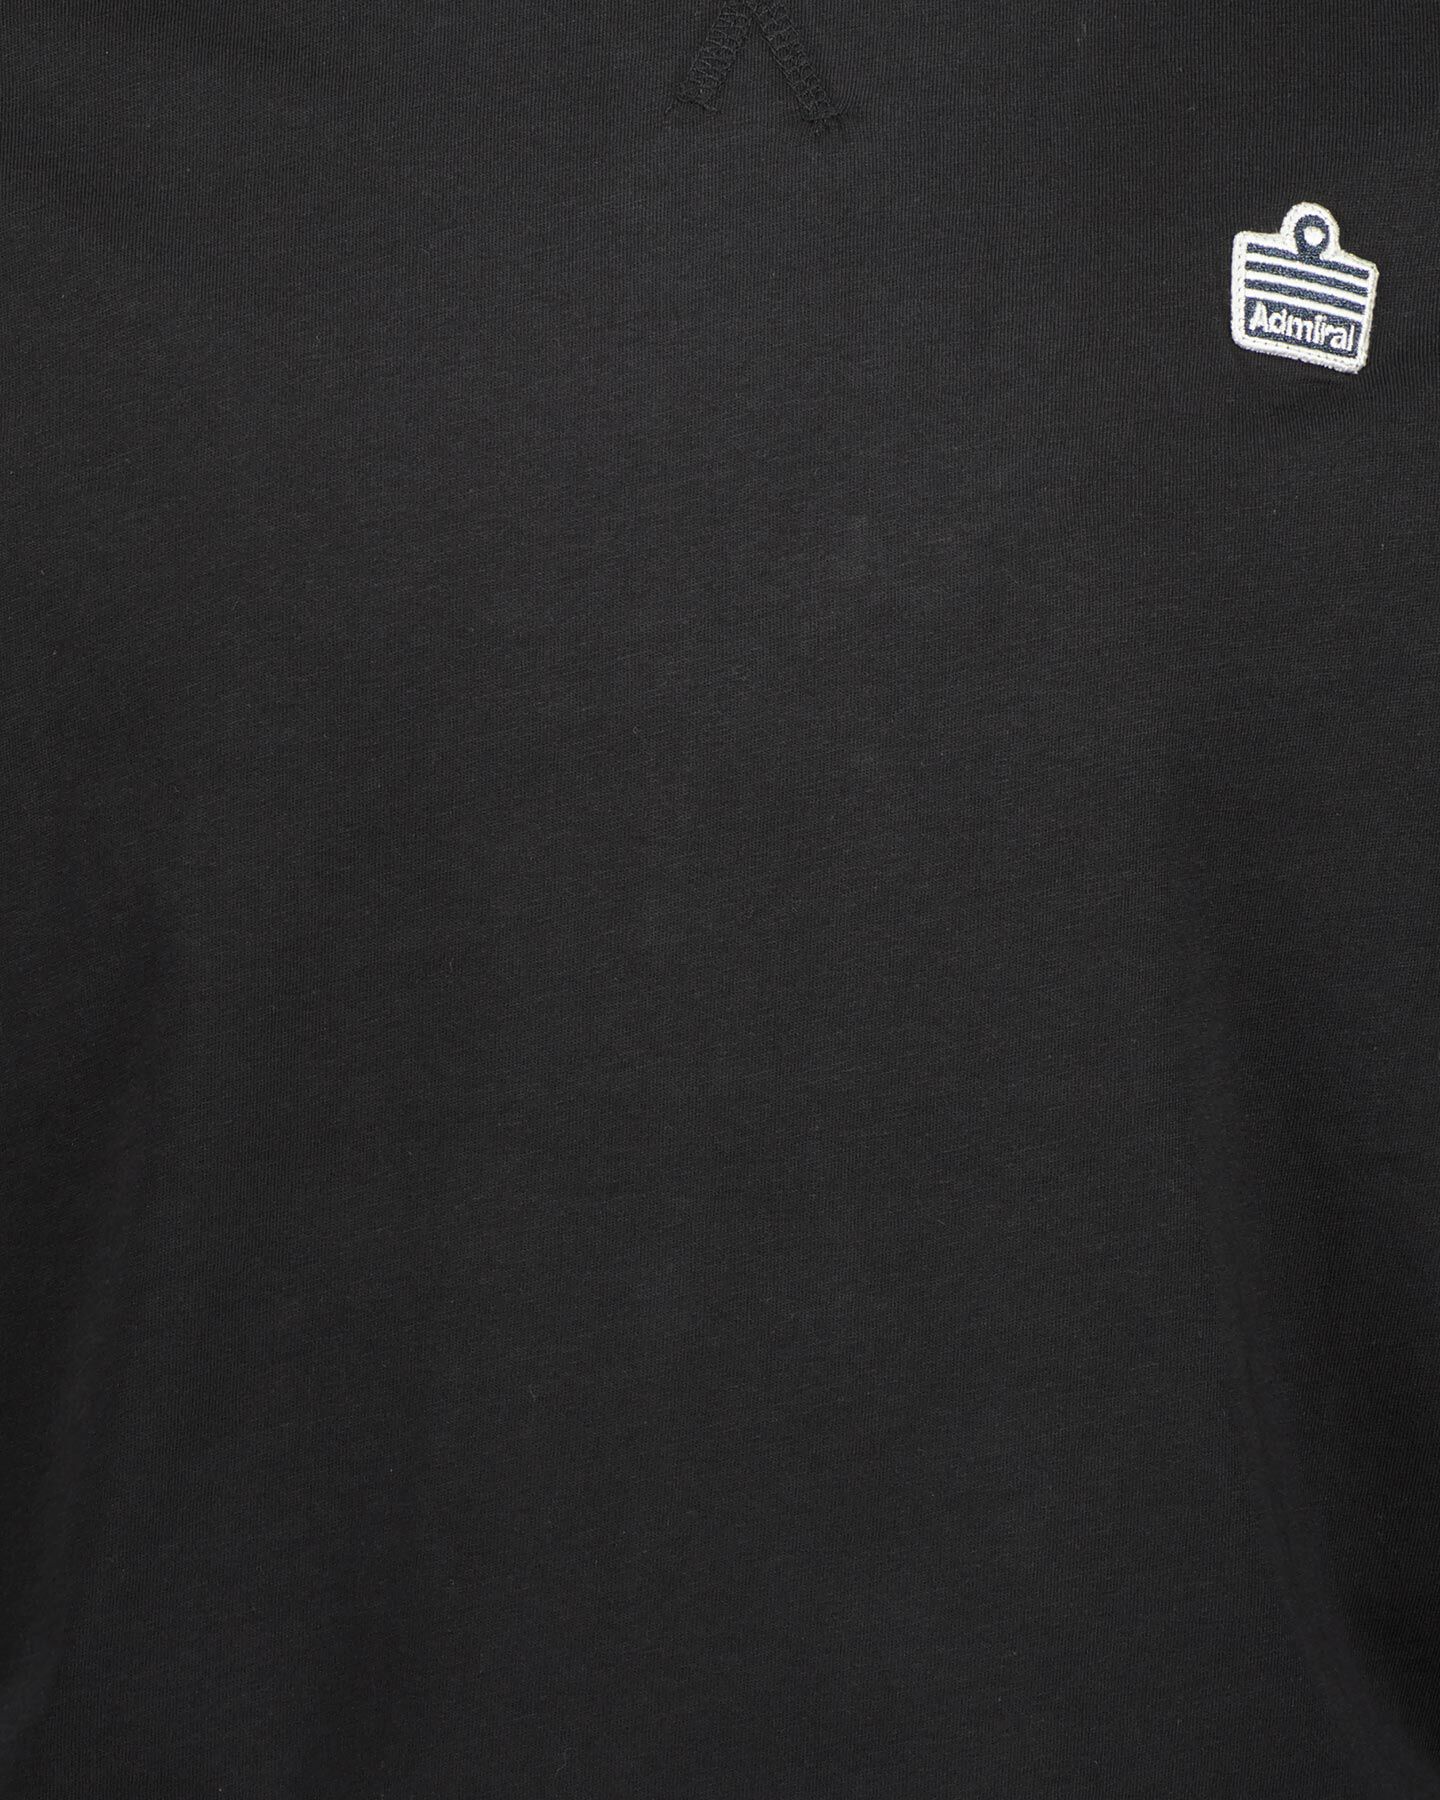  T-Shirt ADMIRAL SMALL LOGO M S4136517|AW007|3XL scatto 2